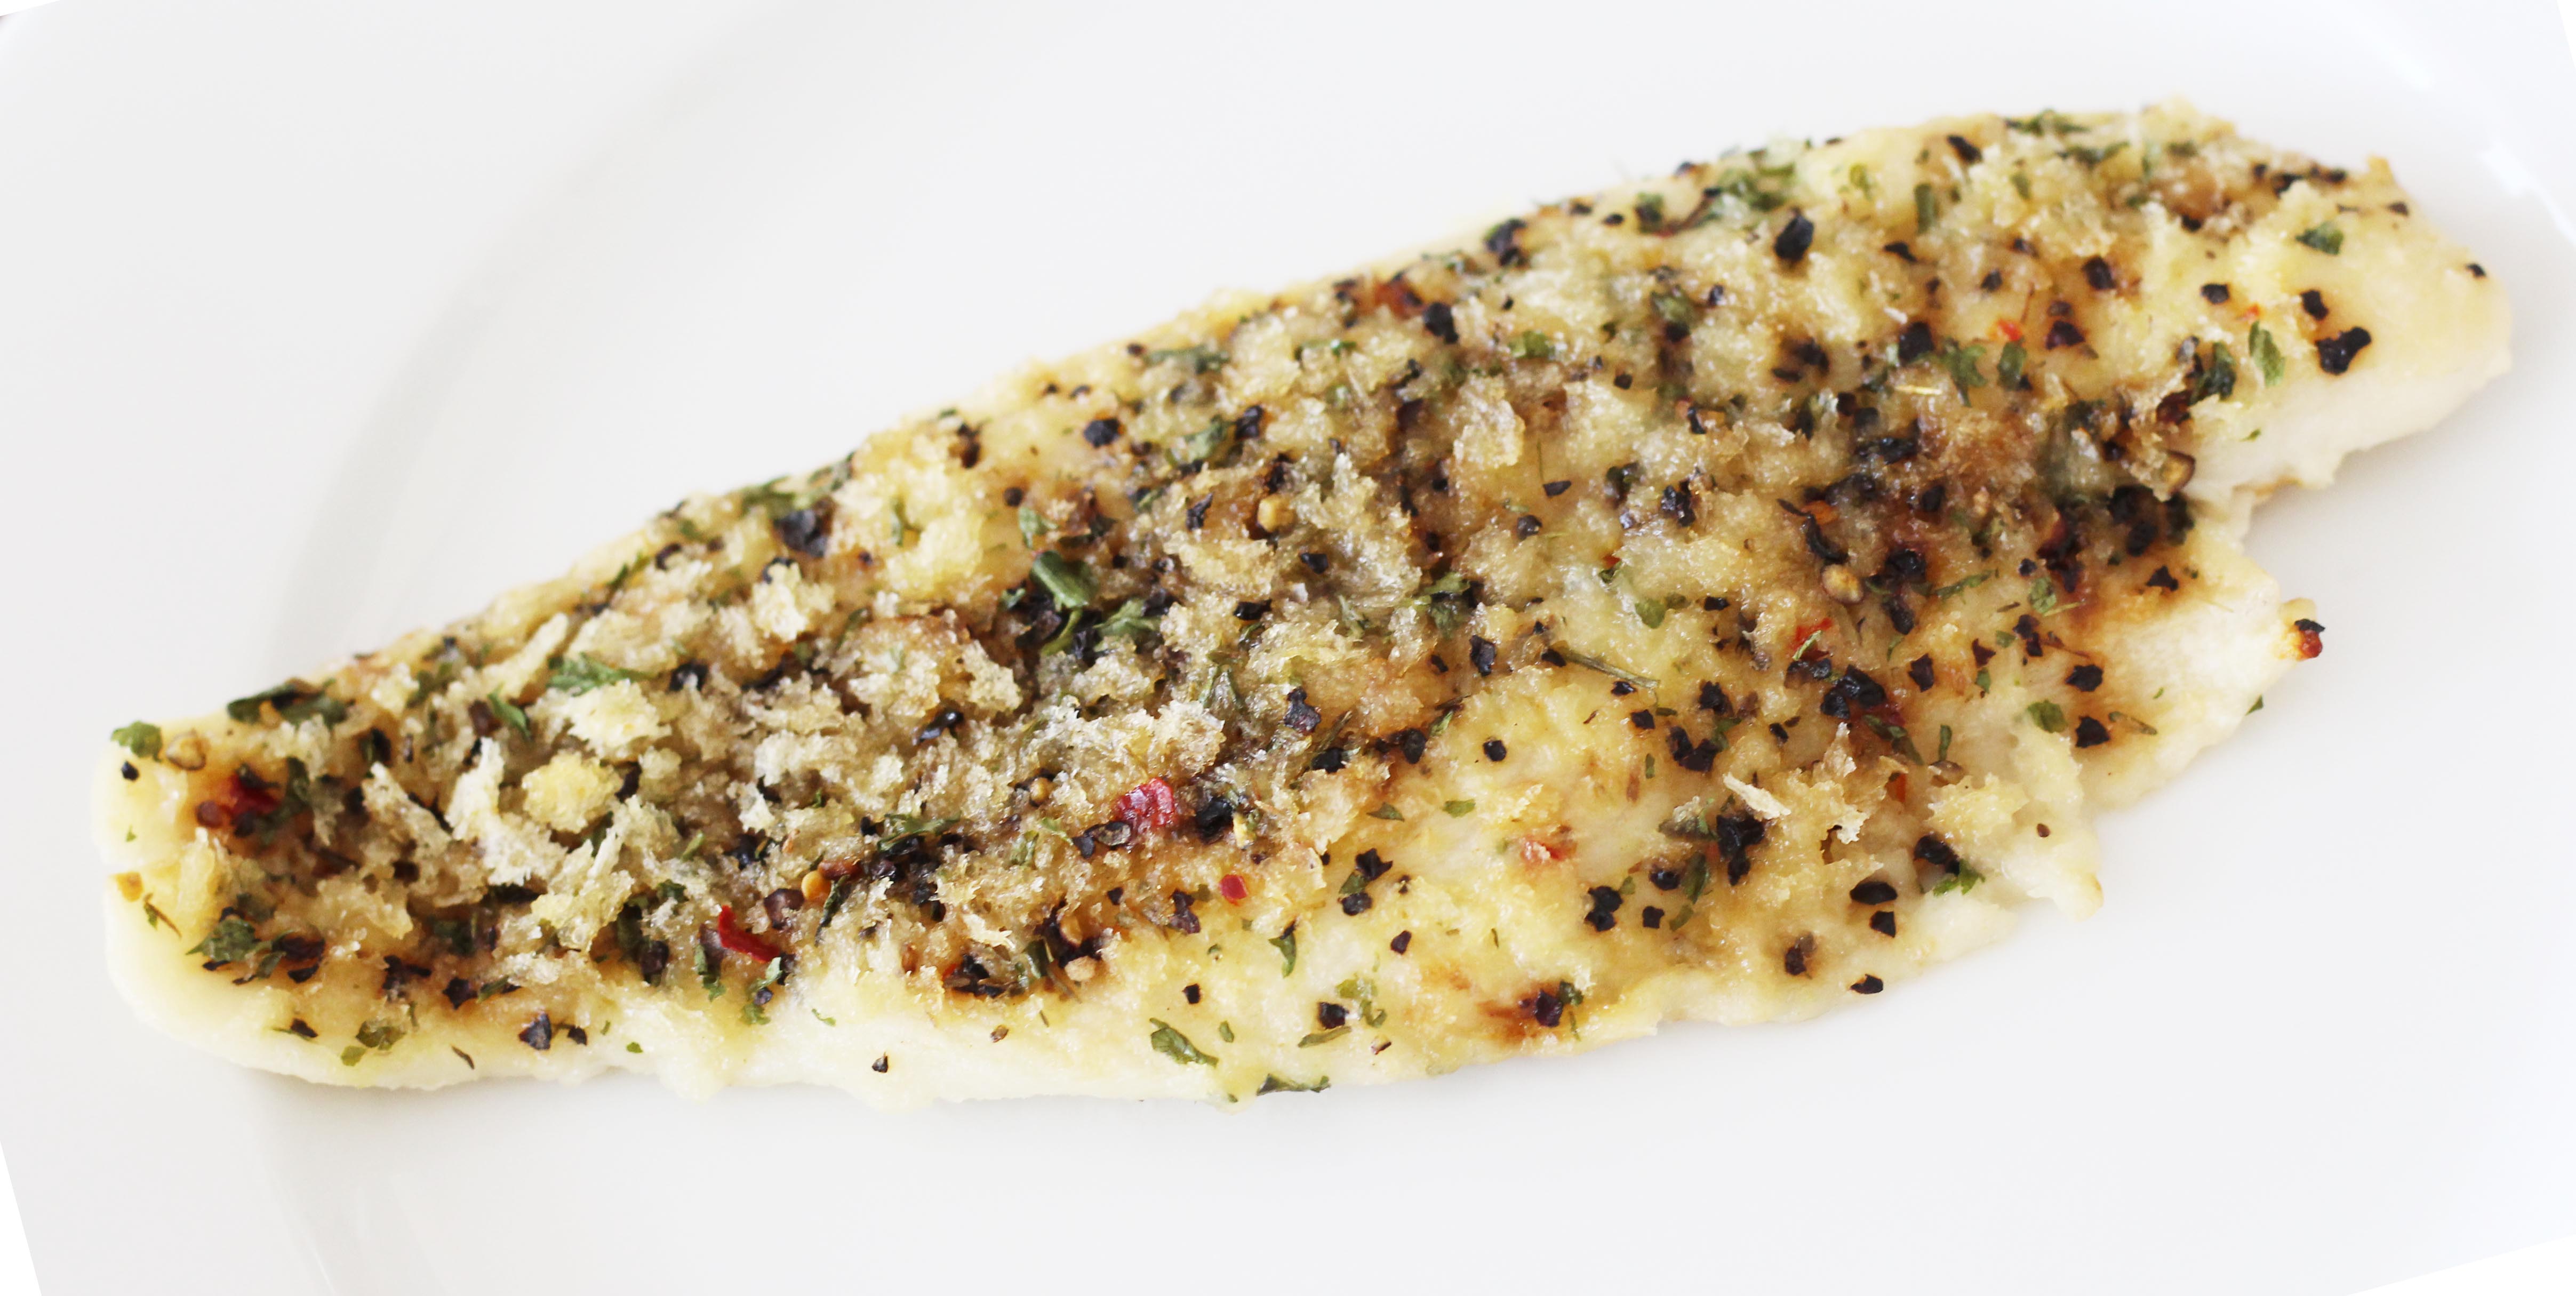 Crusted fish fillets